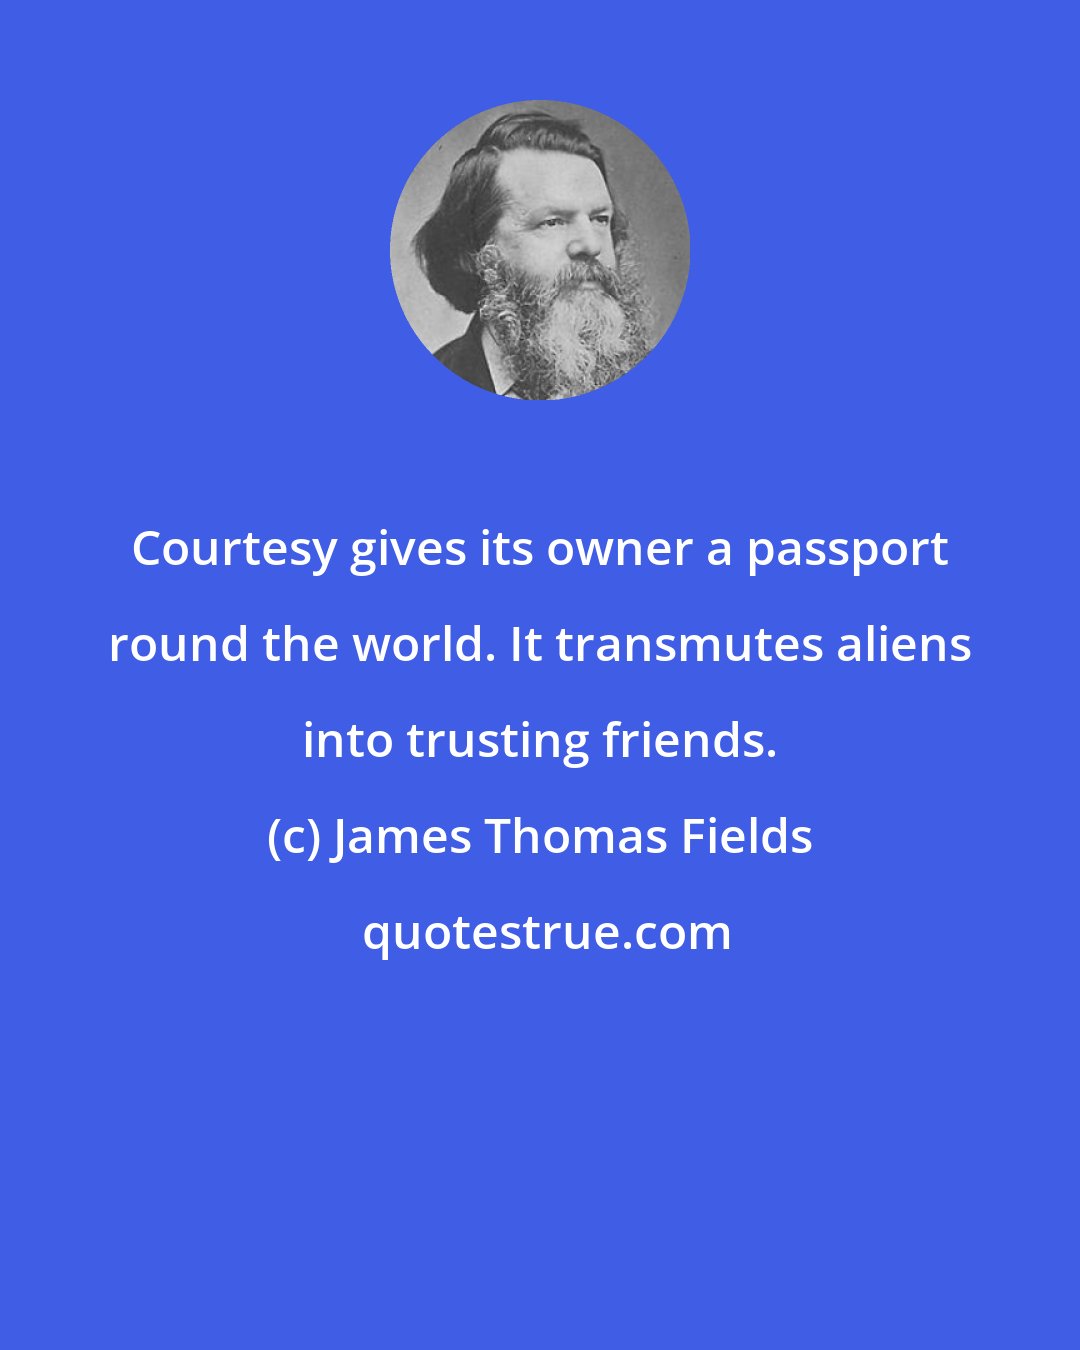 James Thomas Fields: Courtesy gives its owner a passport round the world. It transmutes aliens into trusting friends.